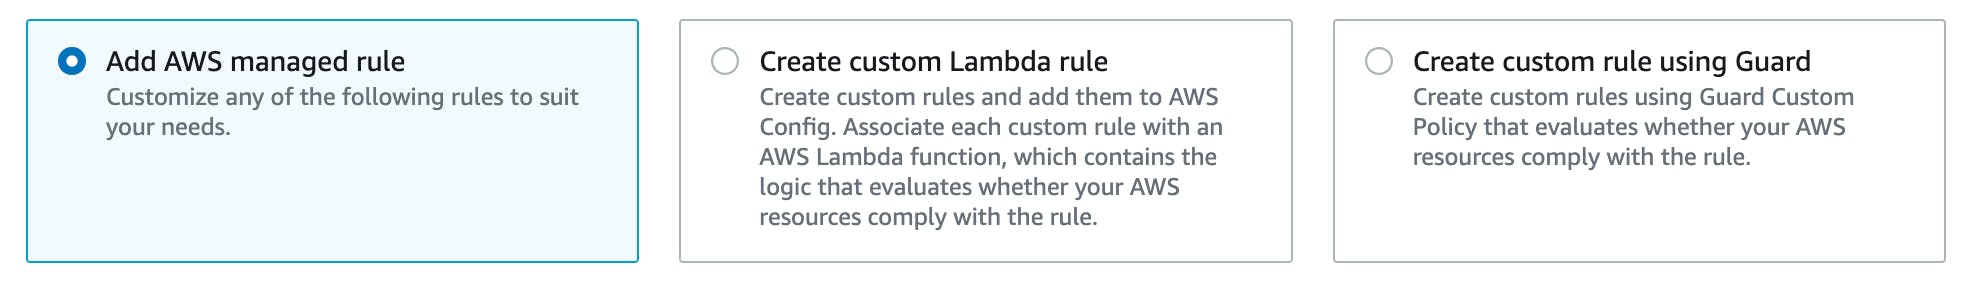 Custom rules can also be used. These are backed by Lambda